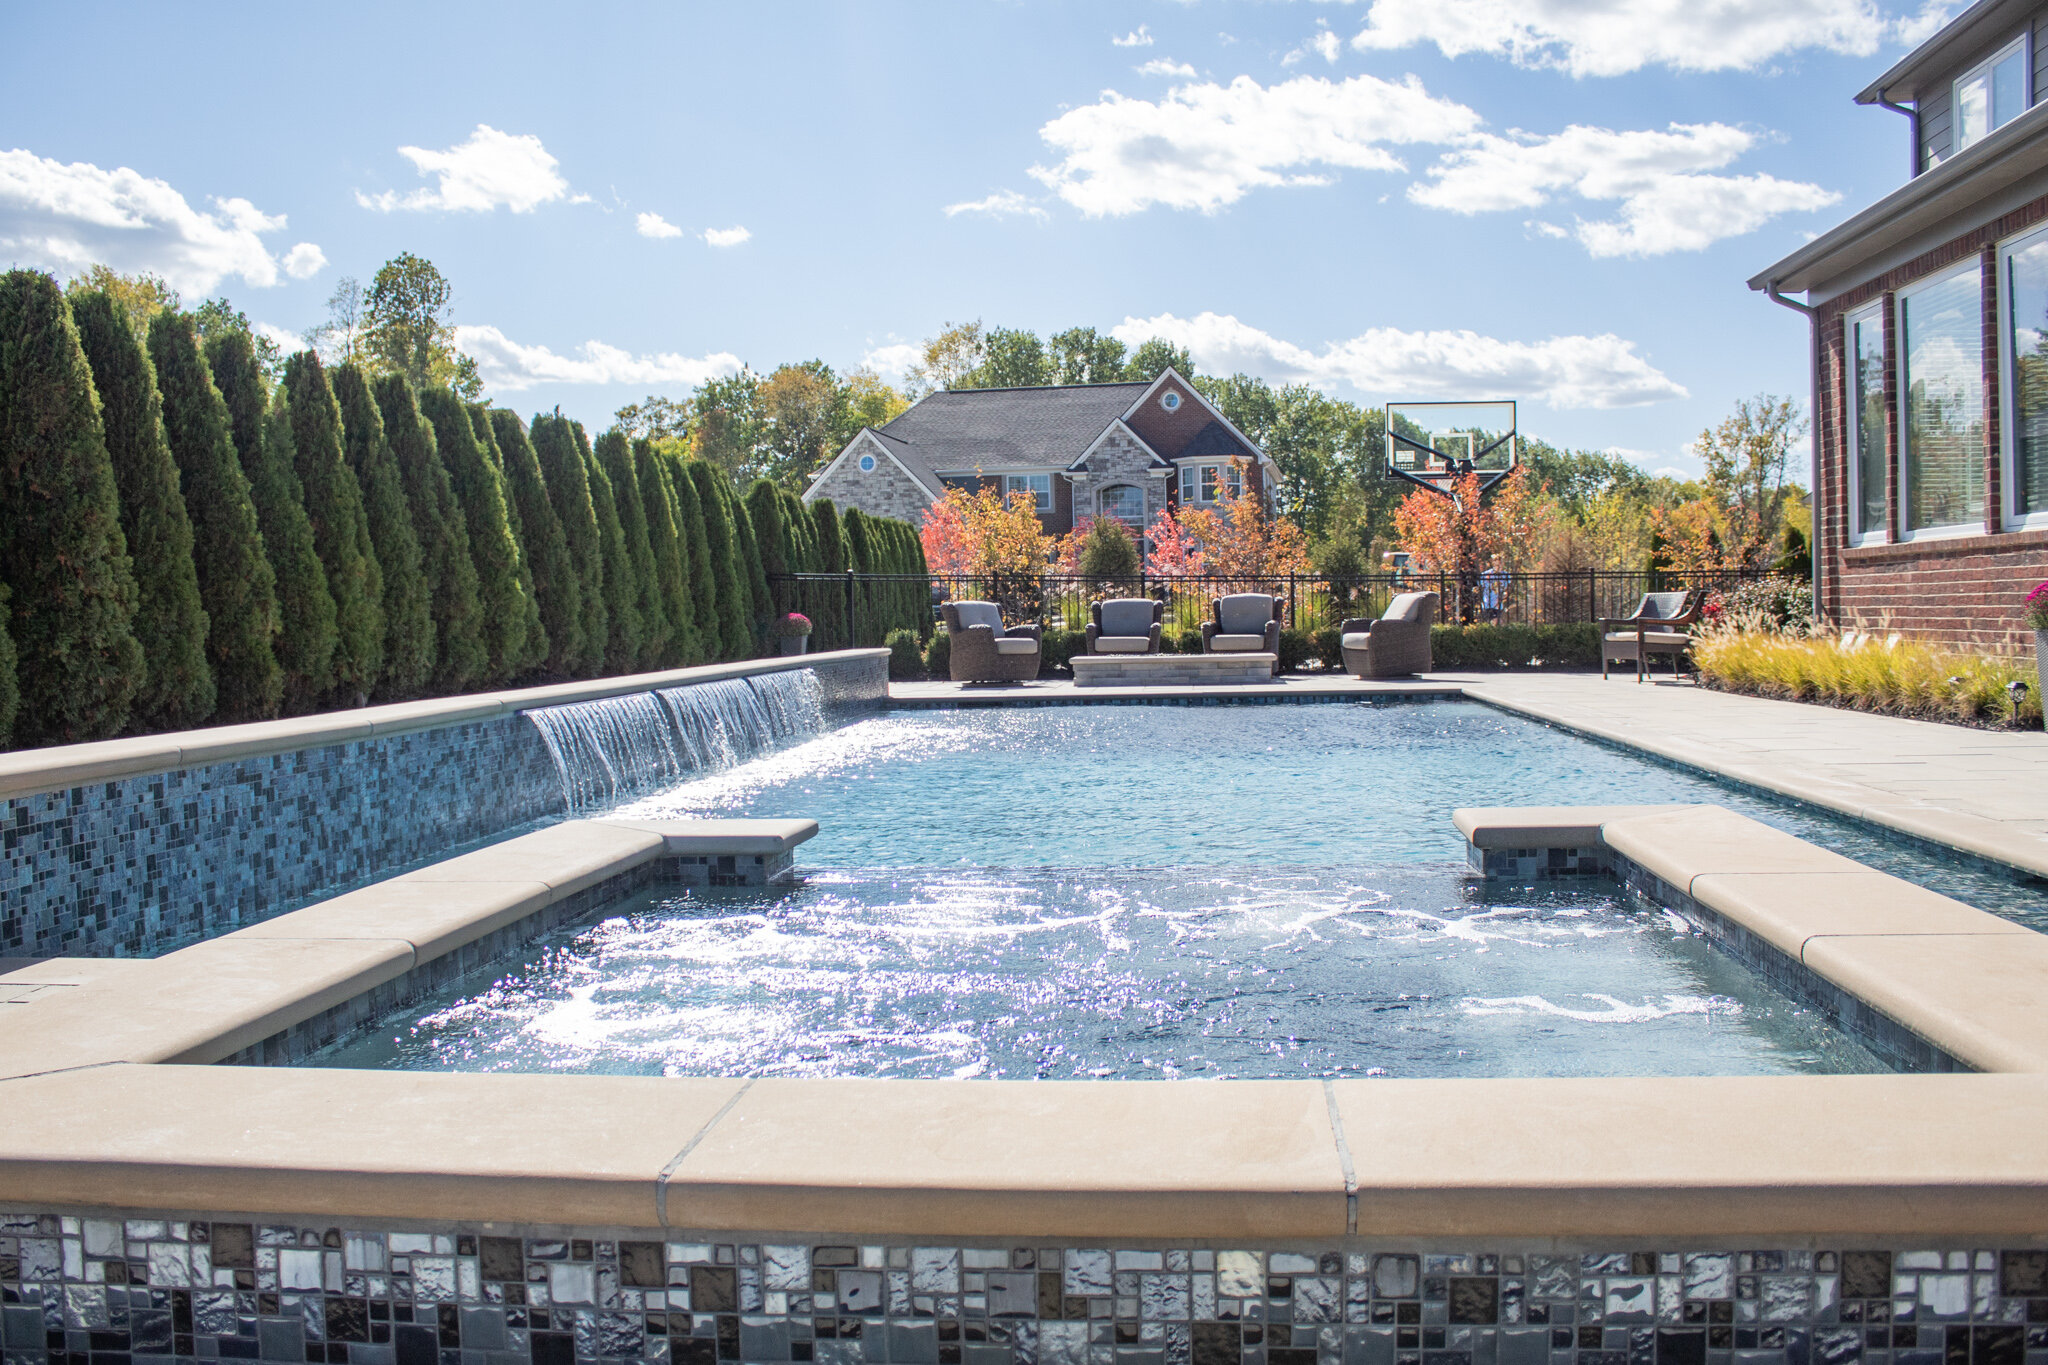 Pool Oasis: Creating Your Ultimate Aquatic Escape